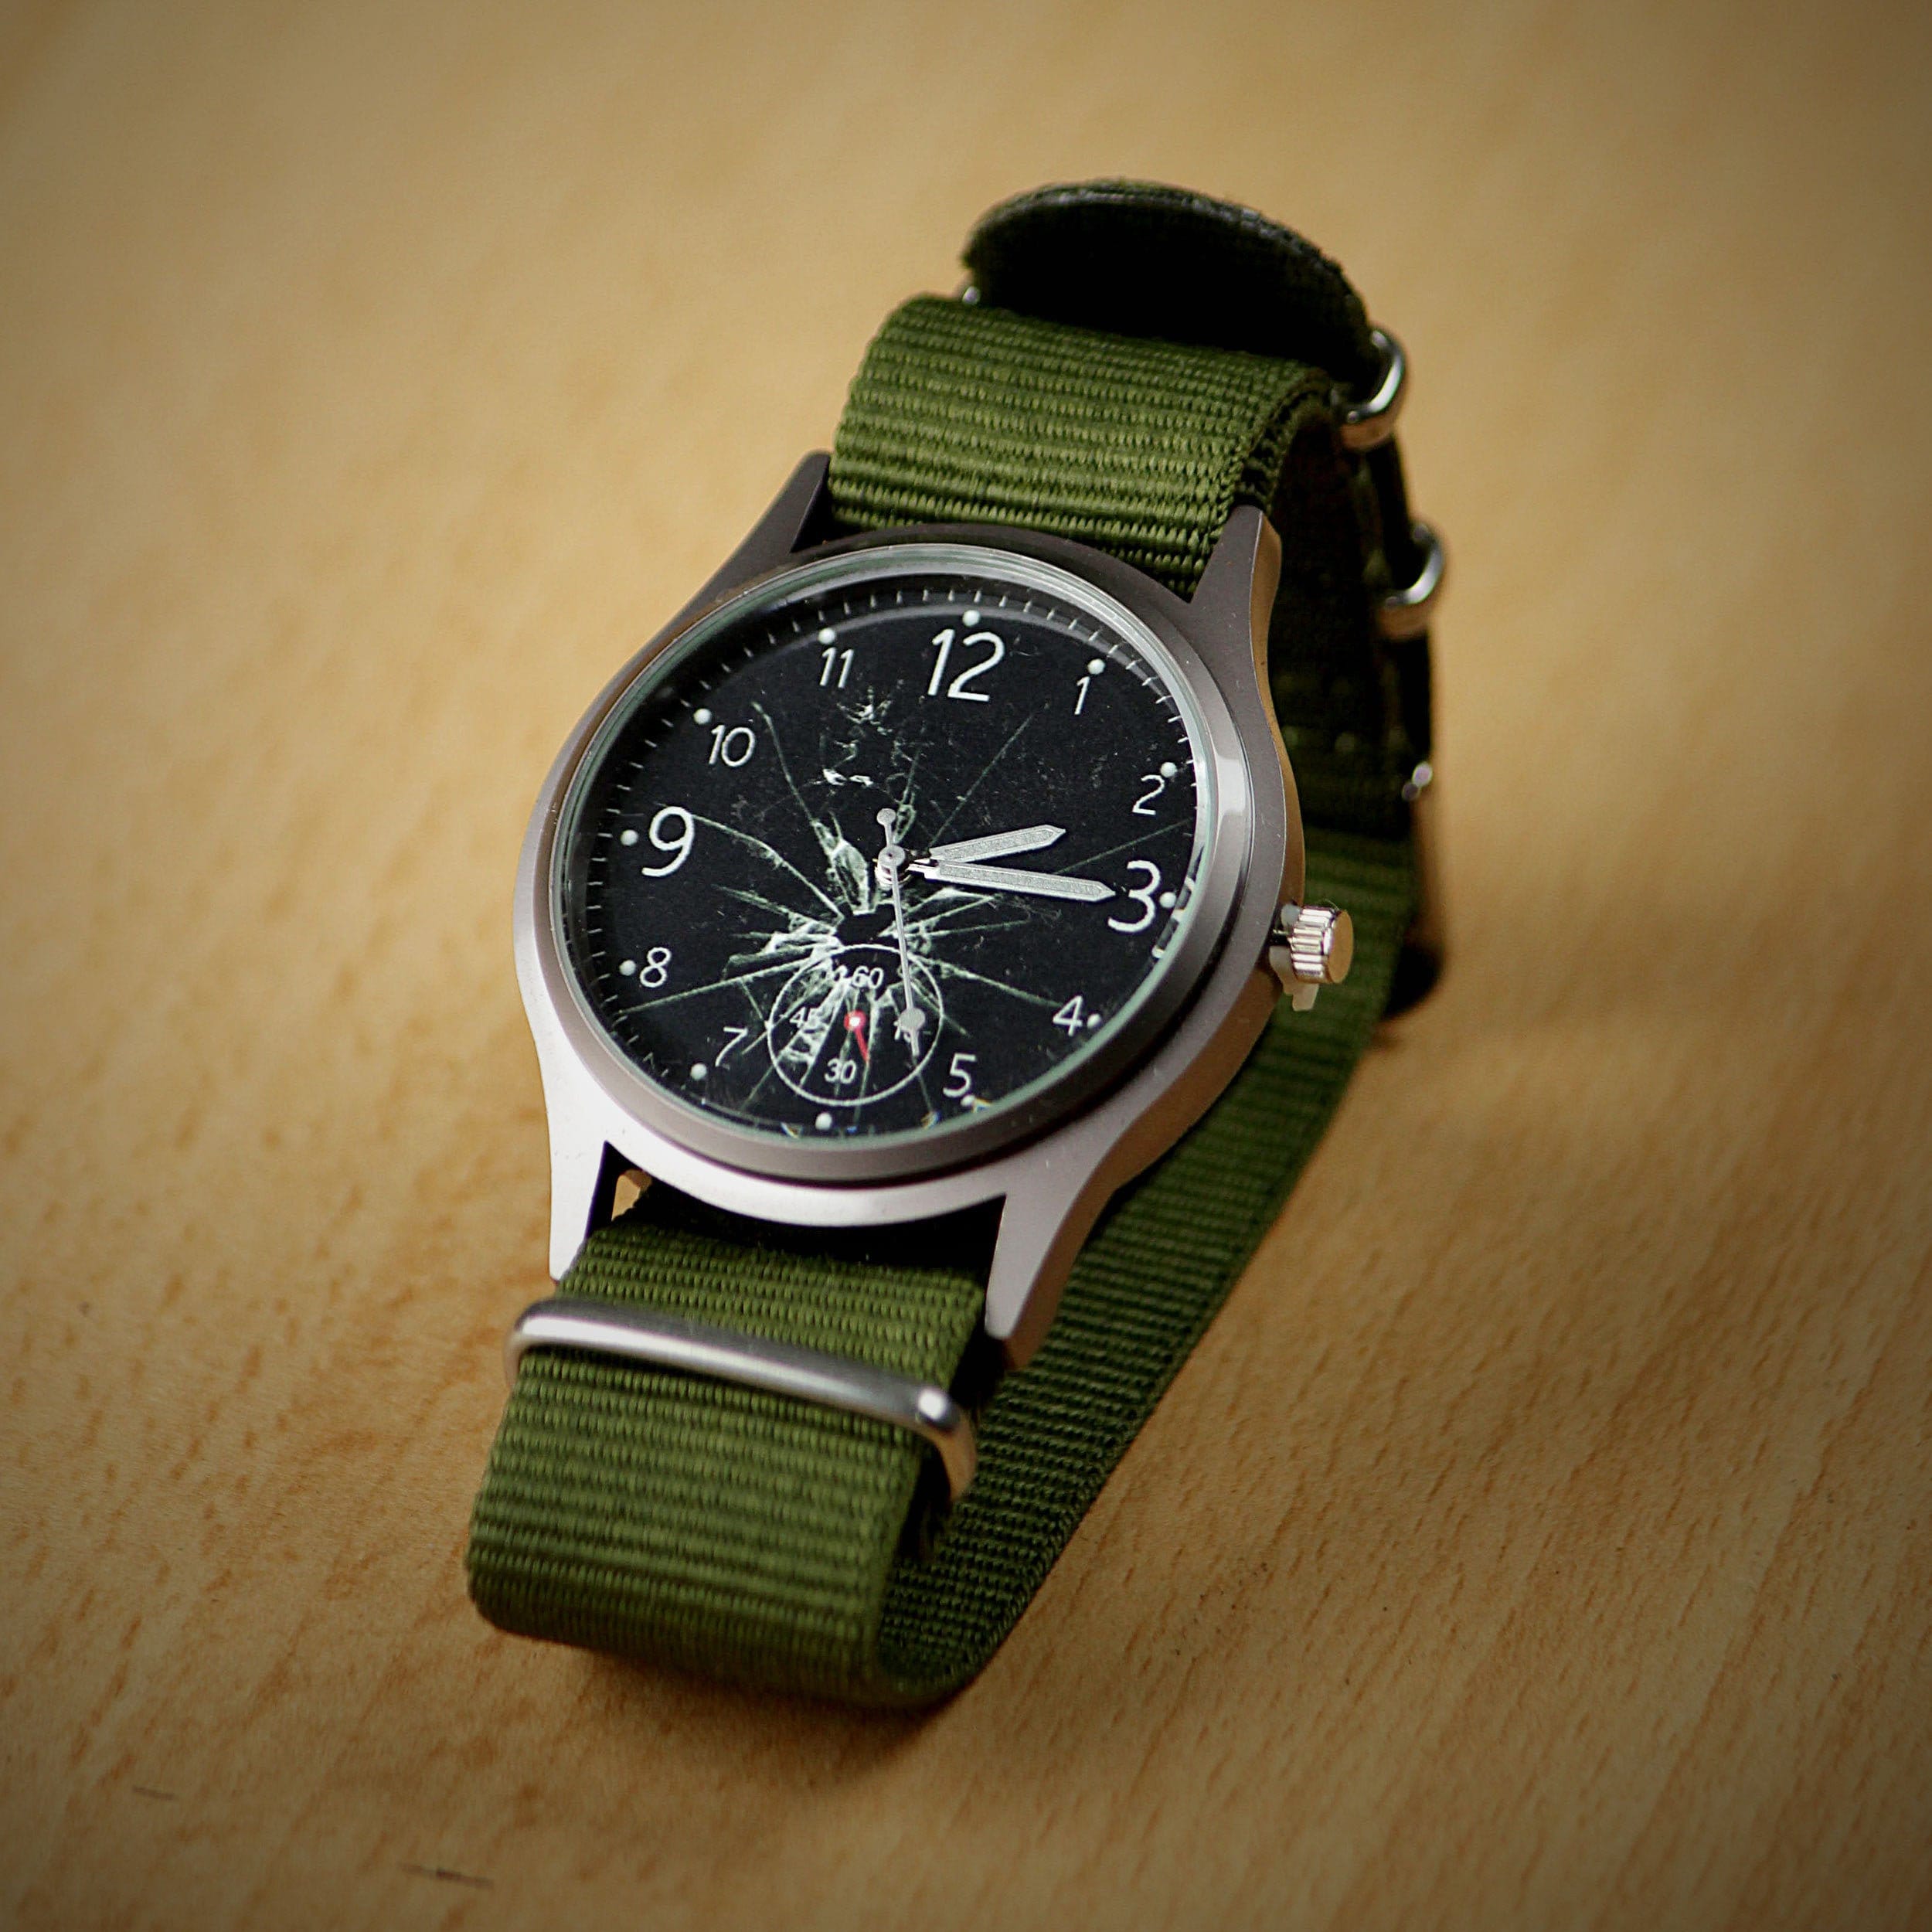 Looking for] Similar Wristwatch from The Last of Us Game : r/Watches